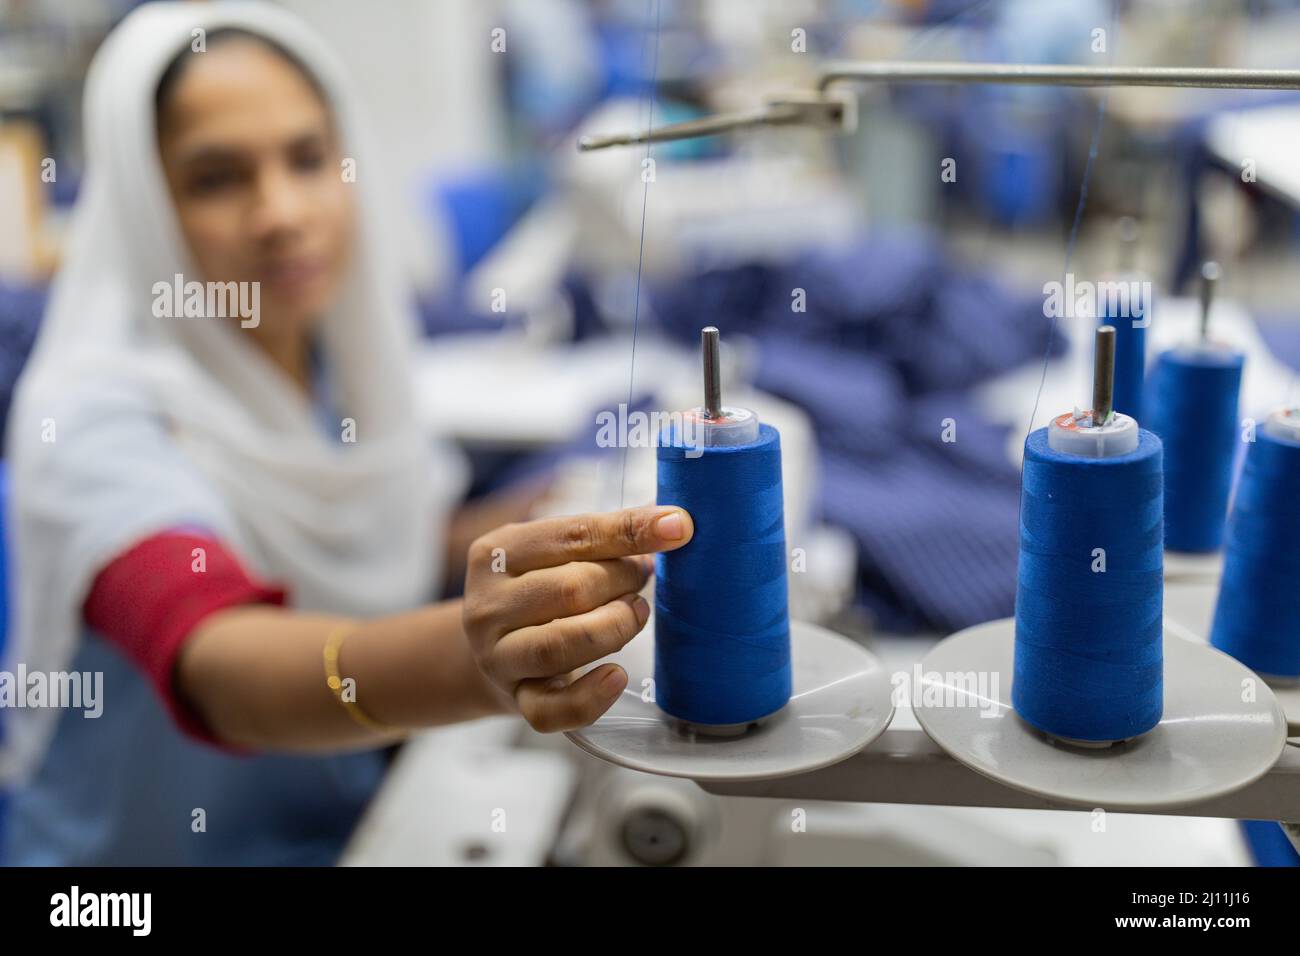 A female worker is taking thread from ribbons for sewing clothes at a readymade garment factory in Gazipur, Bangladesh. The ready-made garment (RMG) industry is a mainstay of this economic success story. Bangladesh is today one of the world's largest garment exporters, with the RMG sector accounting for 84 percent of Bangladesh's exports. Bangladesh. Stock Photo